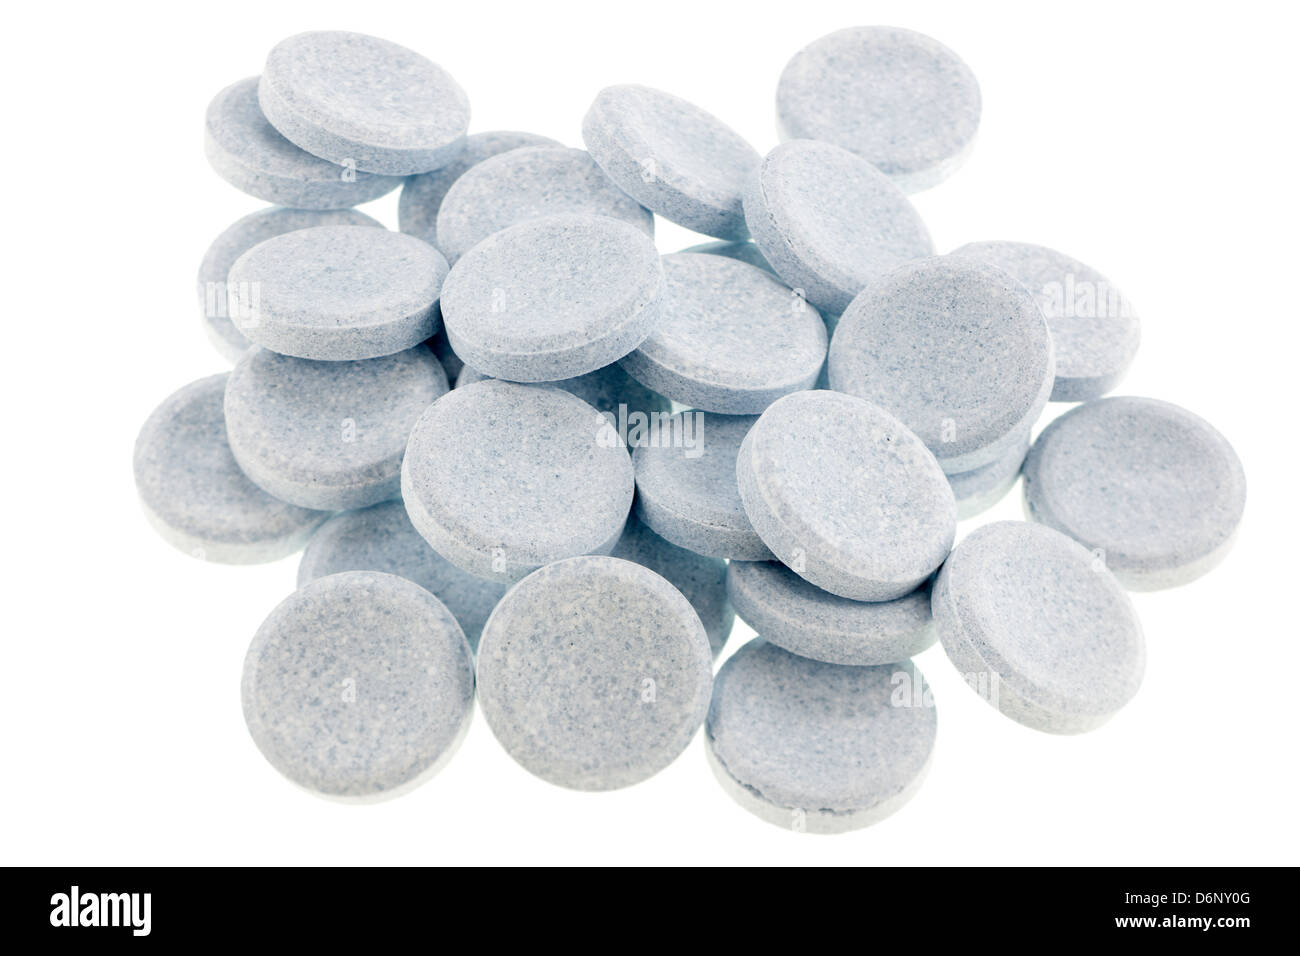 Pile of effervescent bleaching tablets Stock Photo